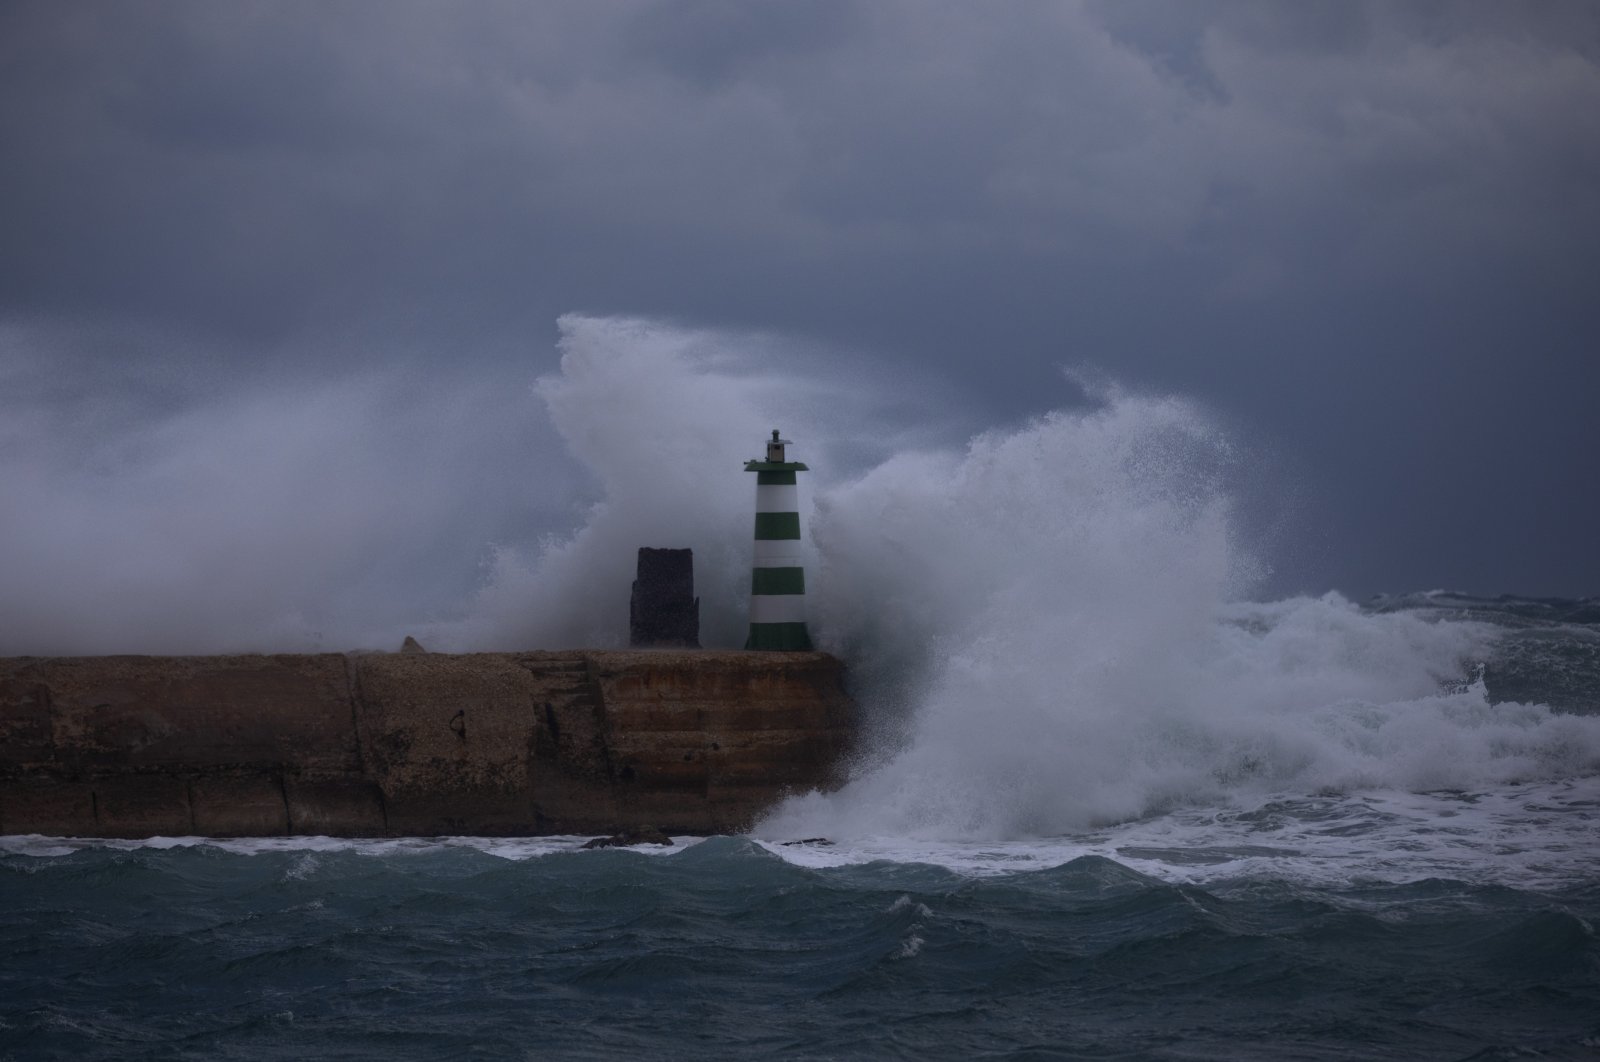 Waves break on a pier near the lighthouse during stormy weather at the port of Jaffa, Israel, Dec. 20, 2021. (AP Photo)